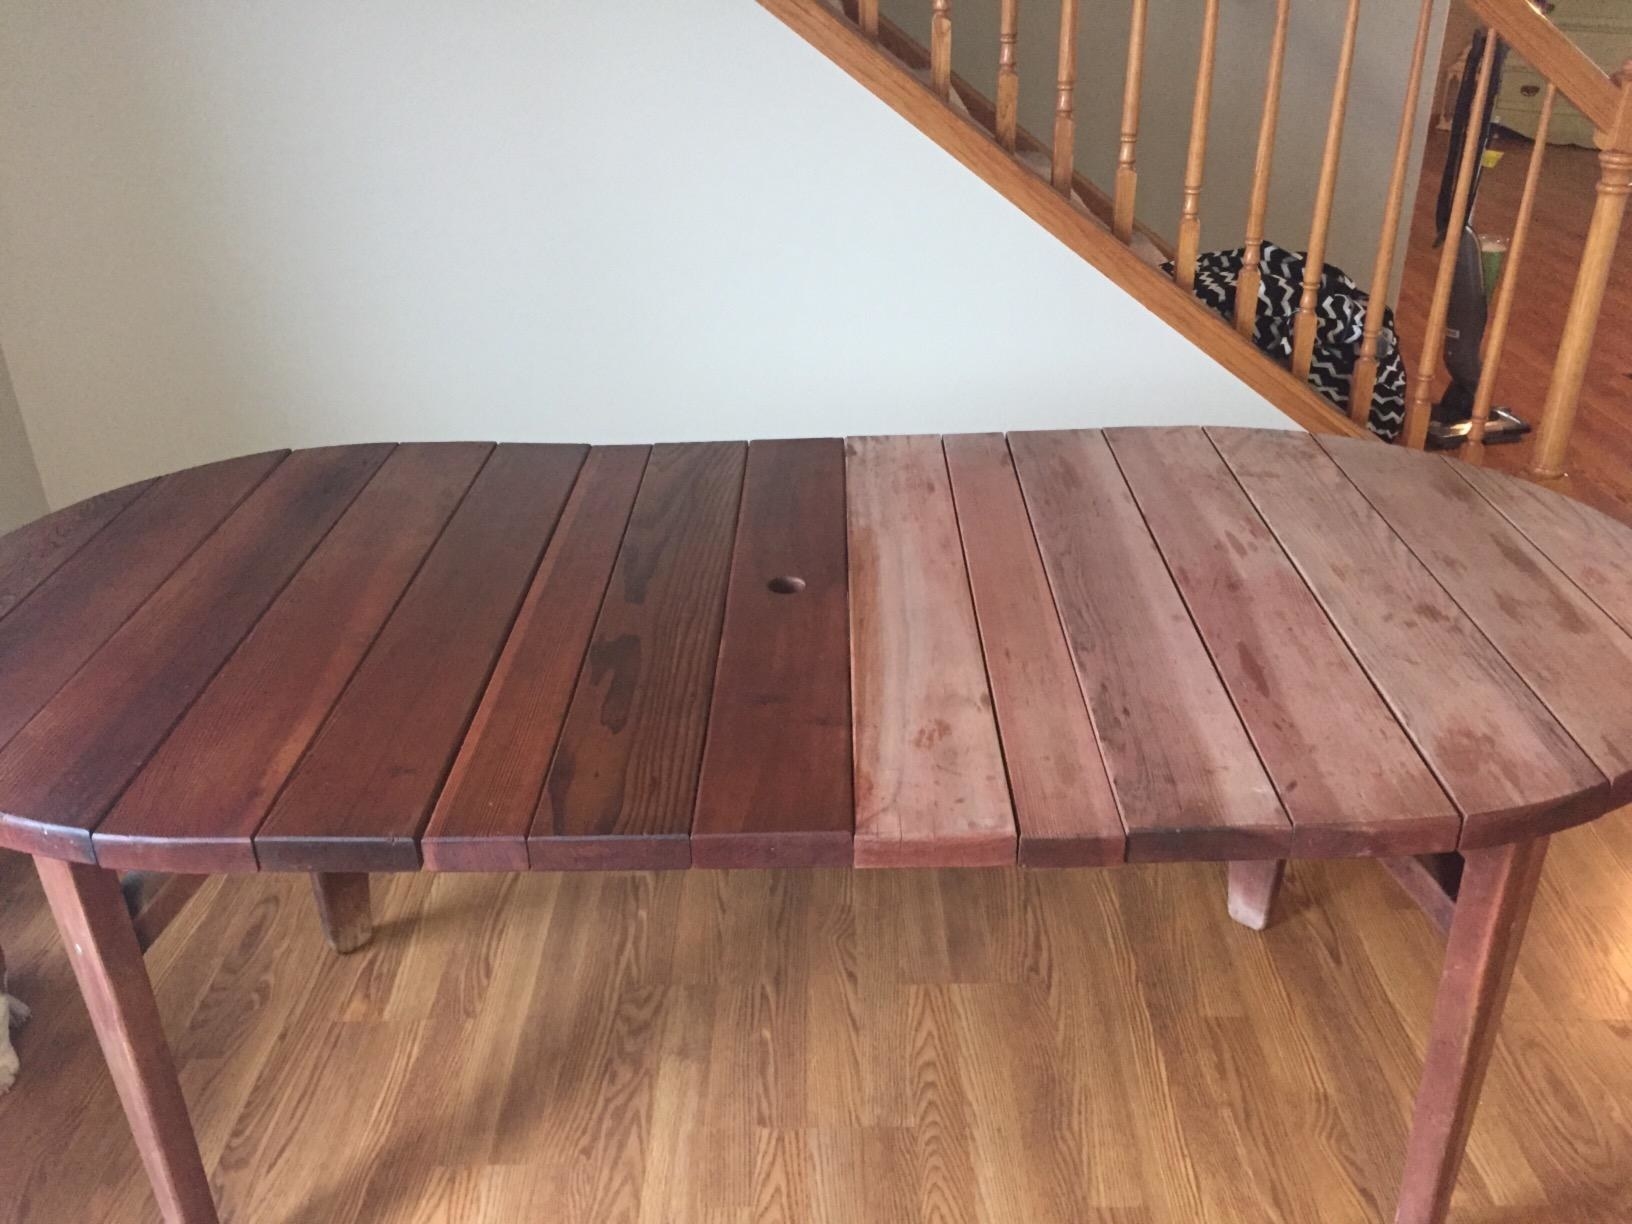 a wooden table with half of it looking darker and shinier